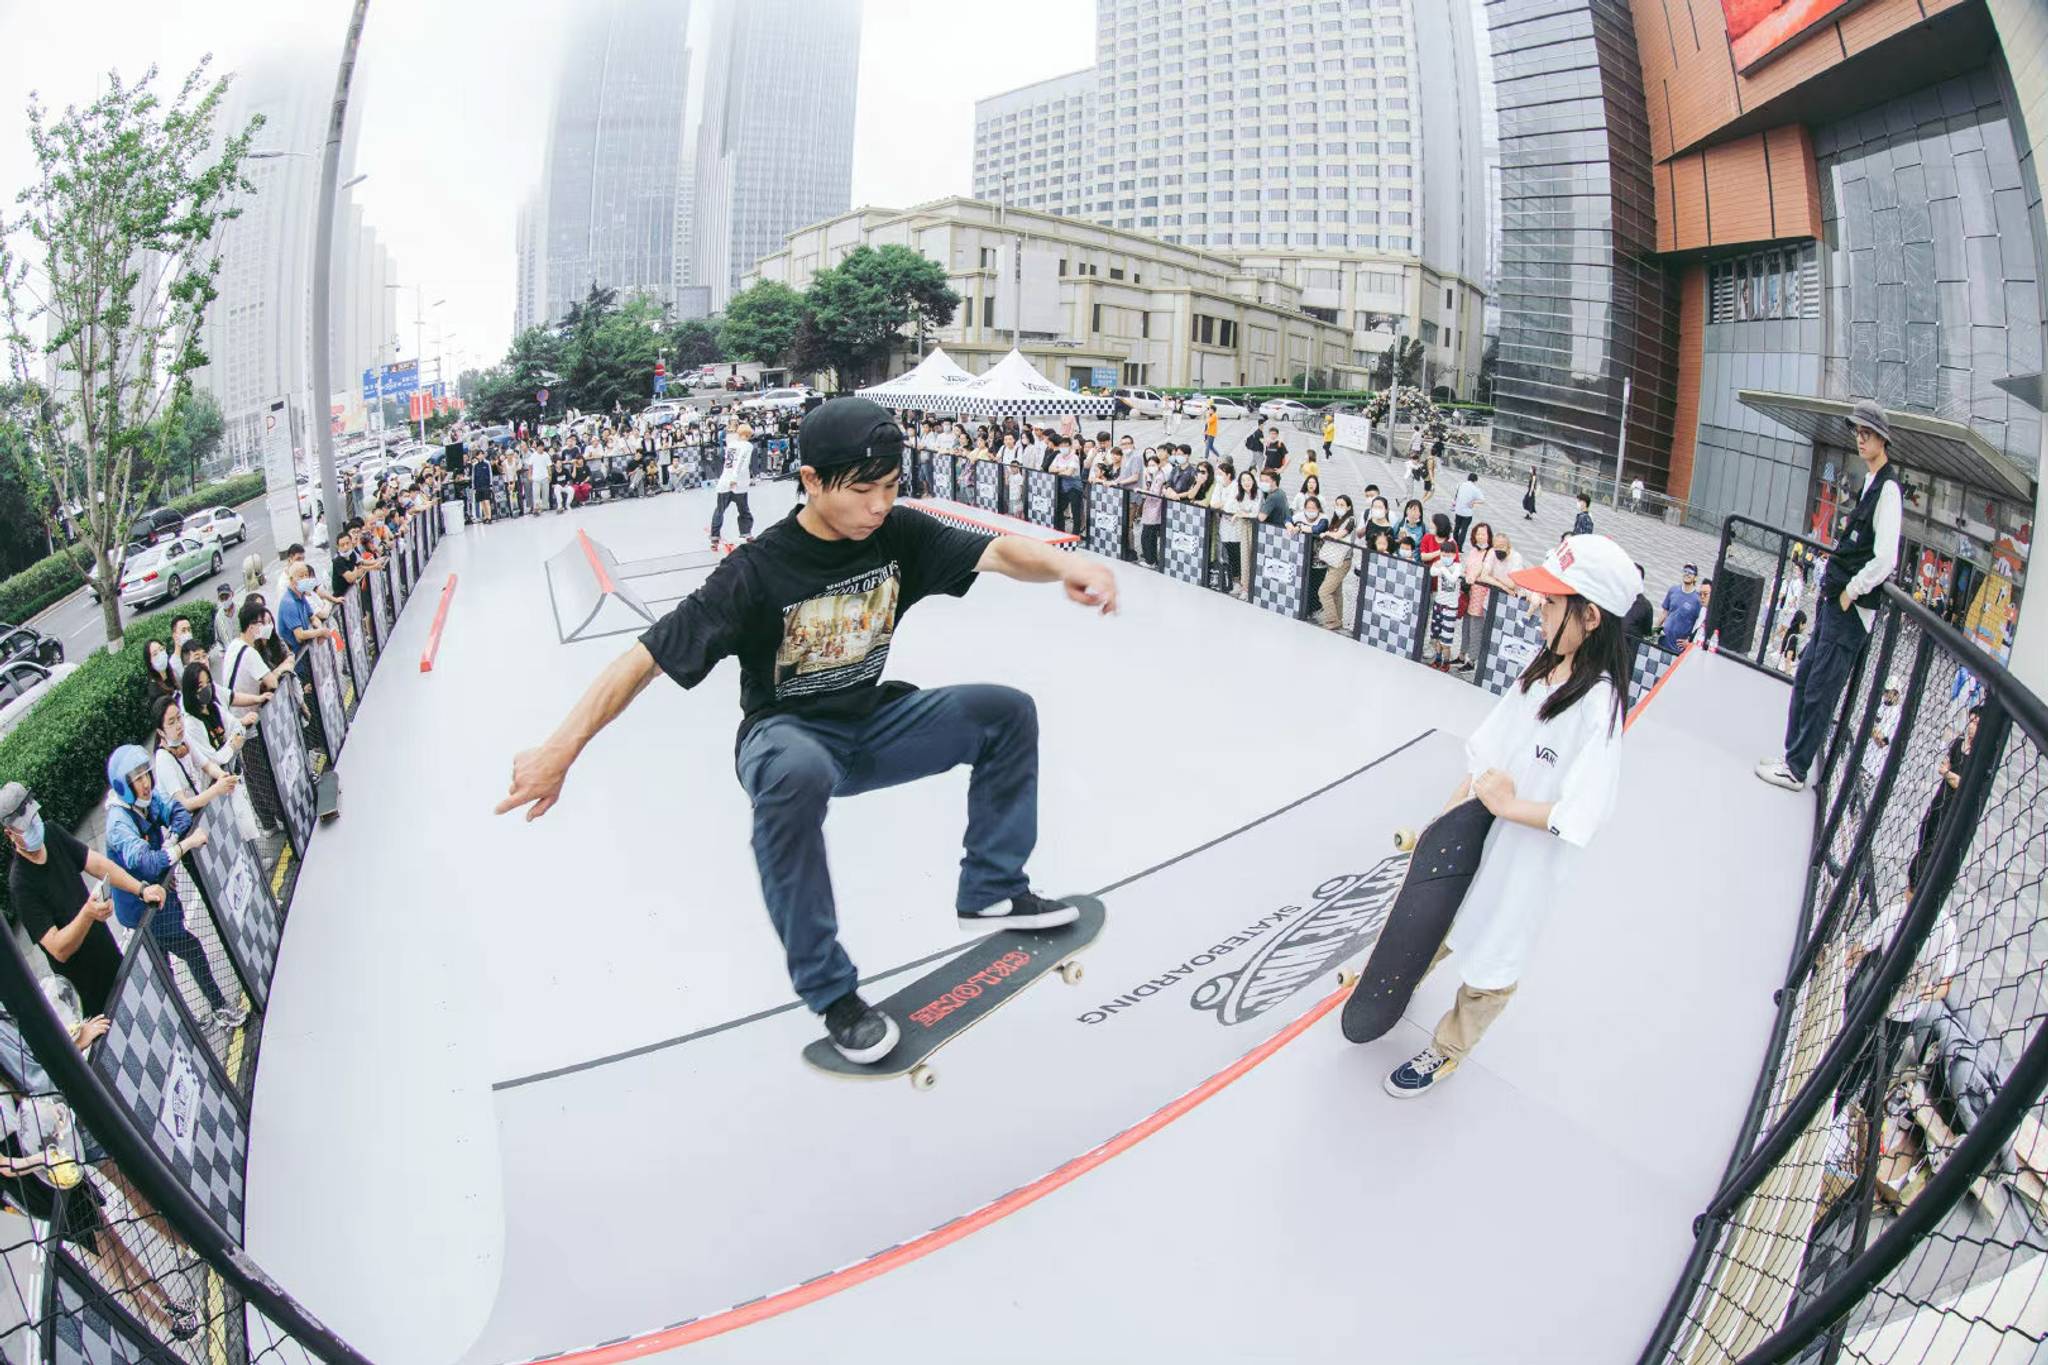 Desire for adventure sees skateboarding boom in China